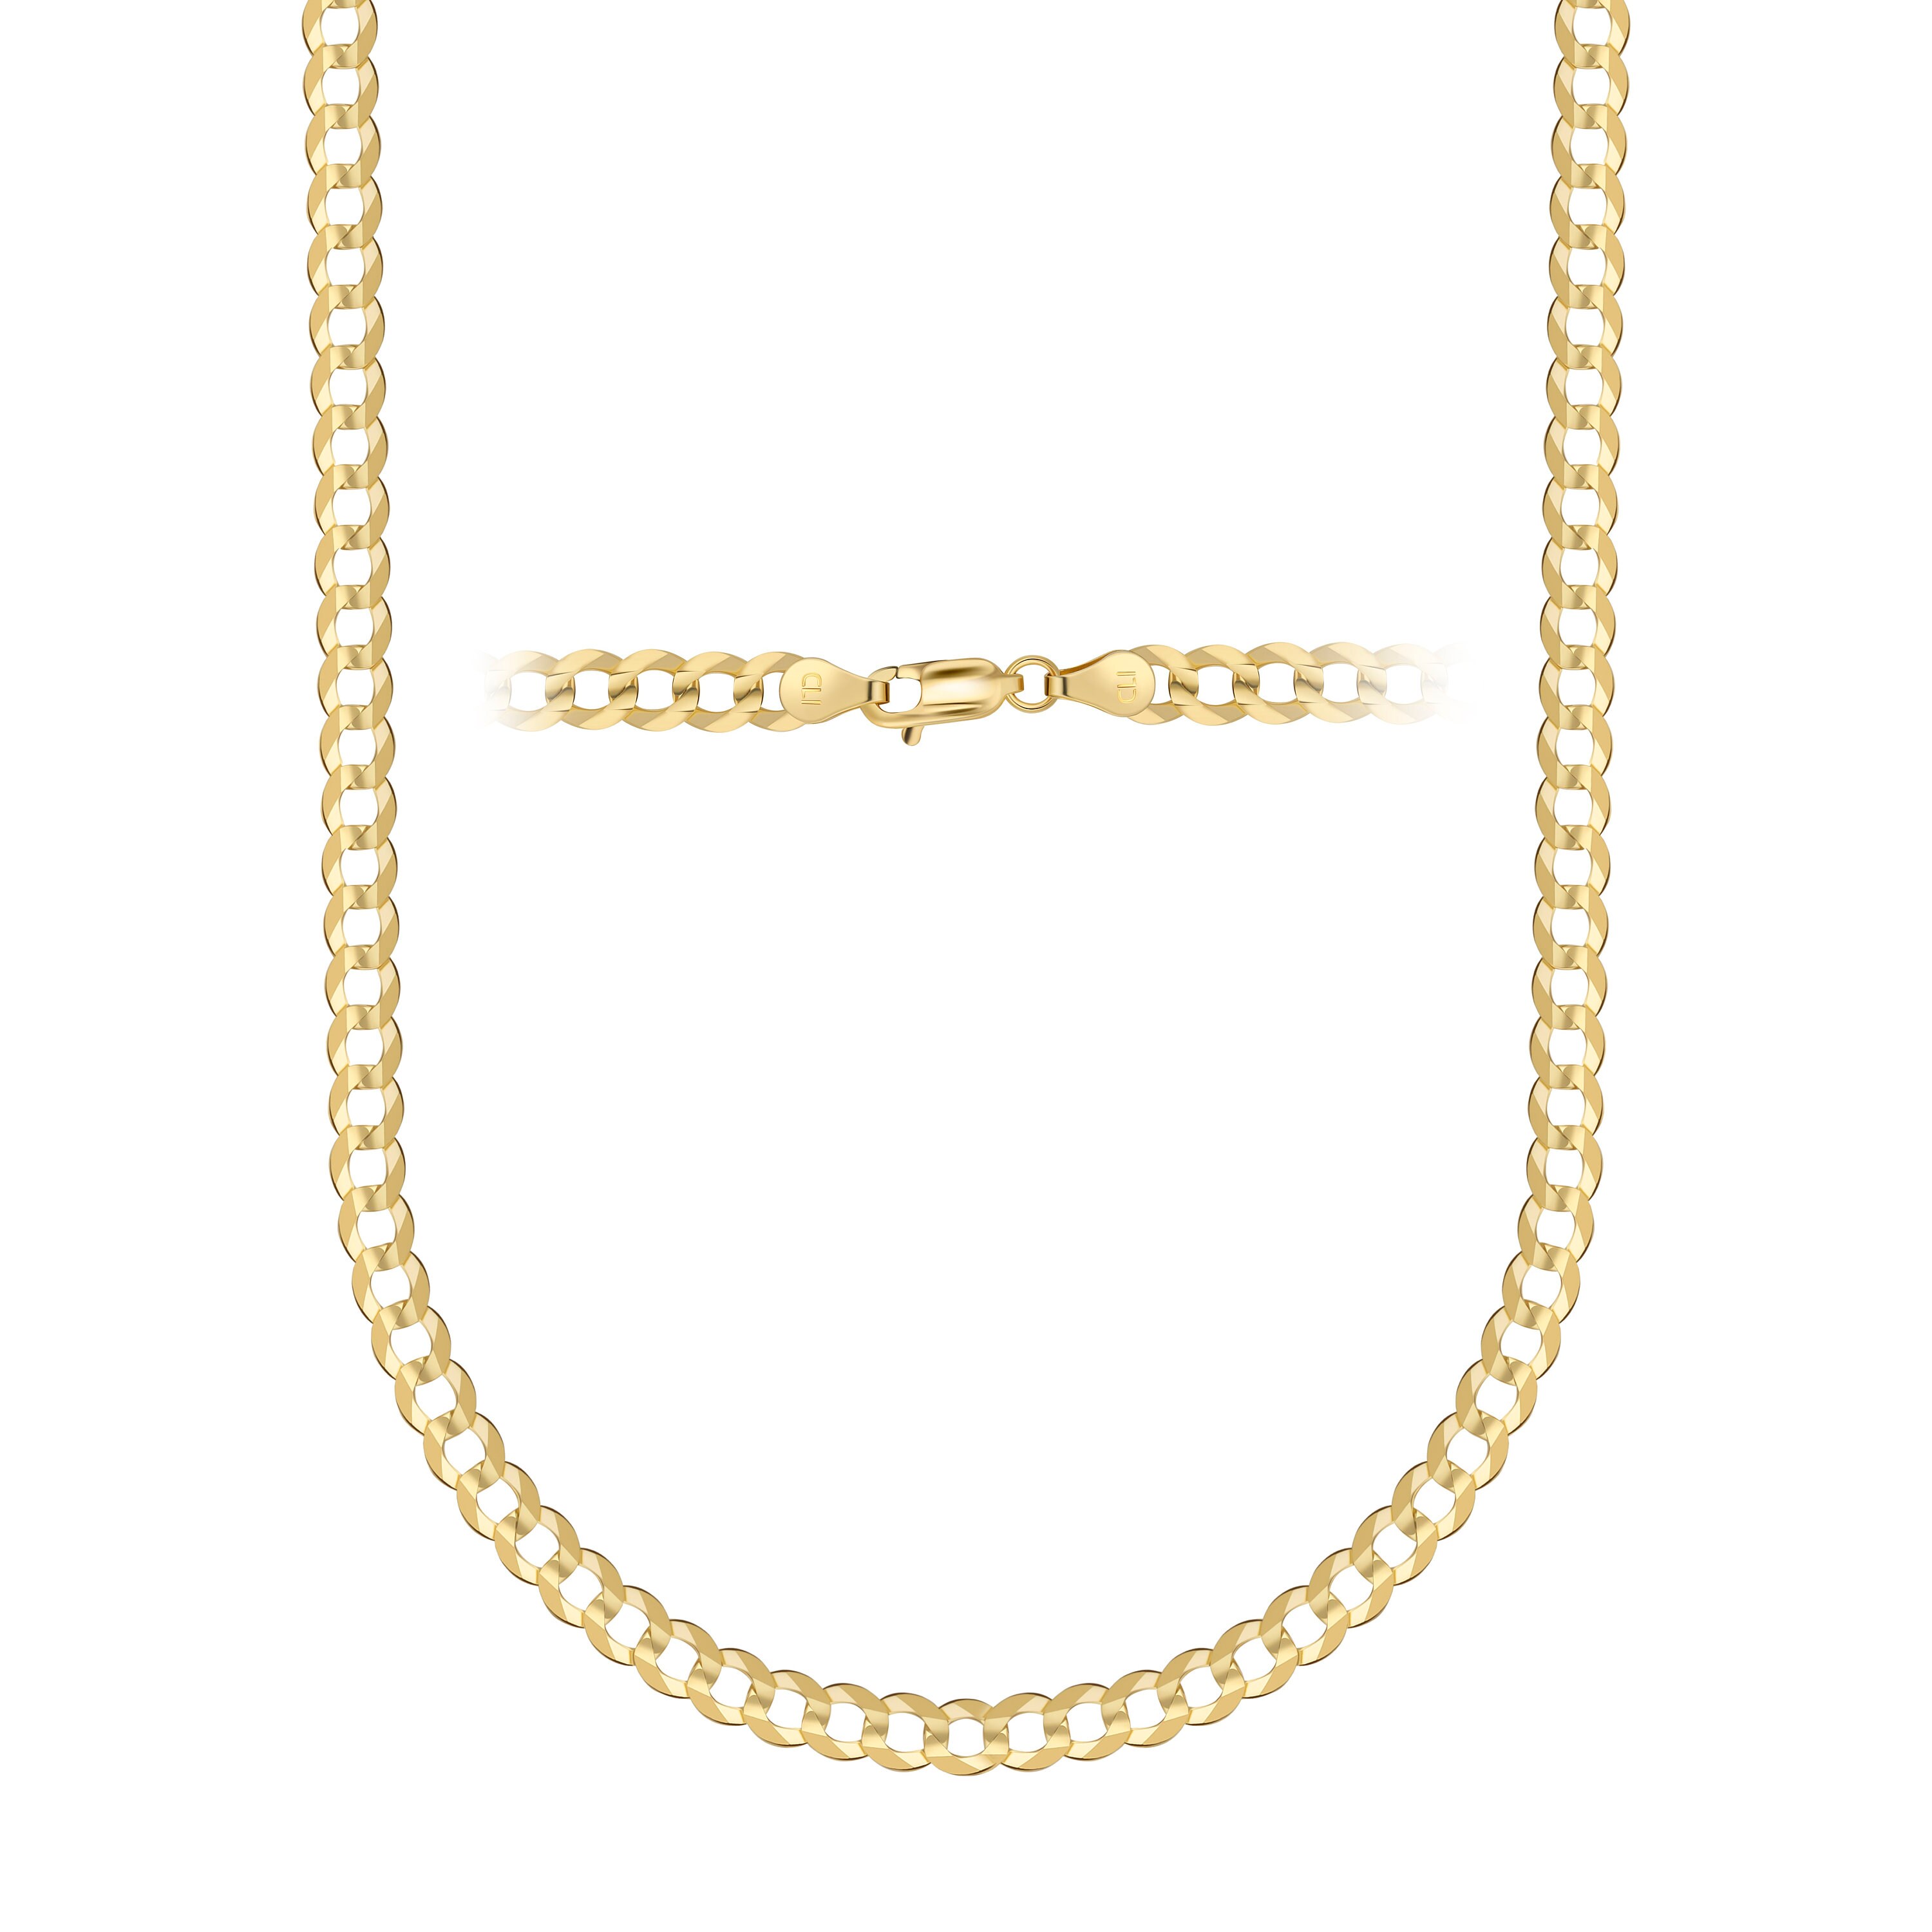 Pori Jewelers 14K Yellow Gold Cuban/Curb Chain Necklace and Bracelet